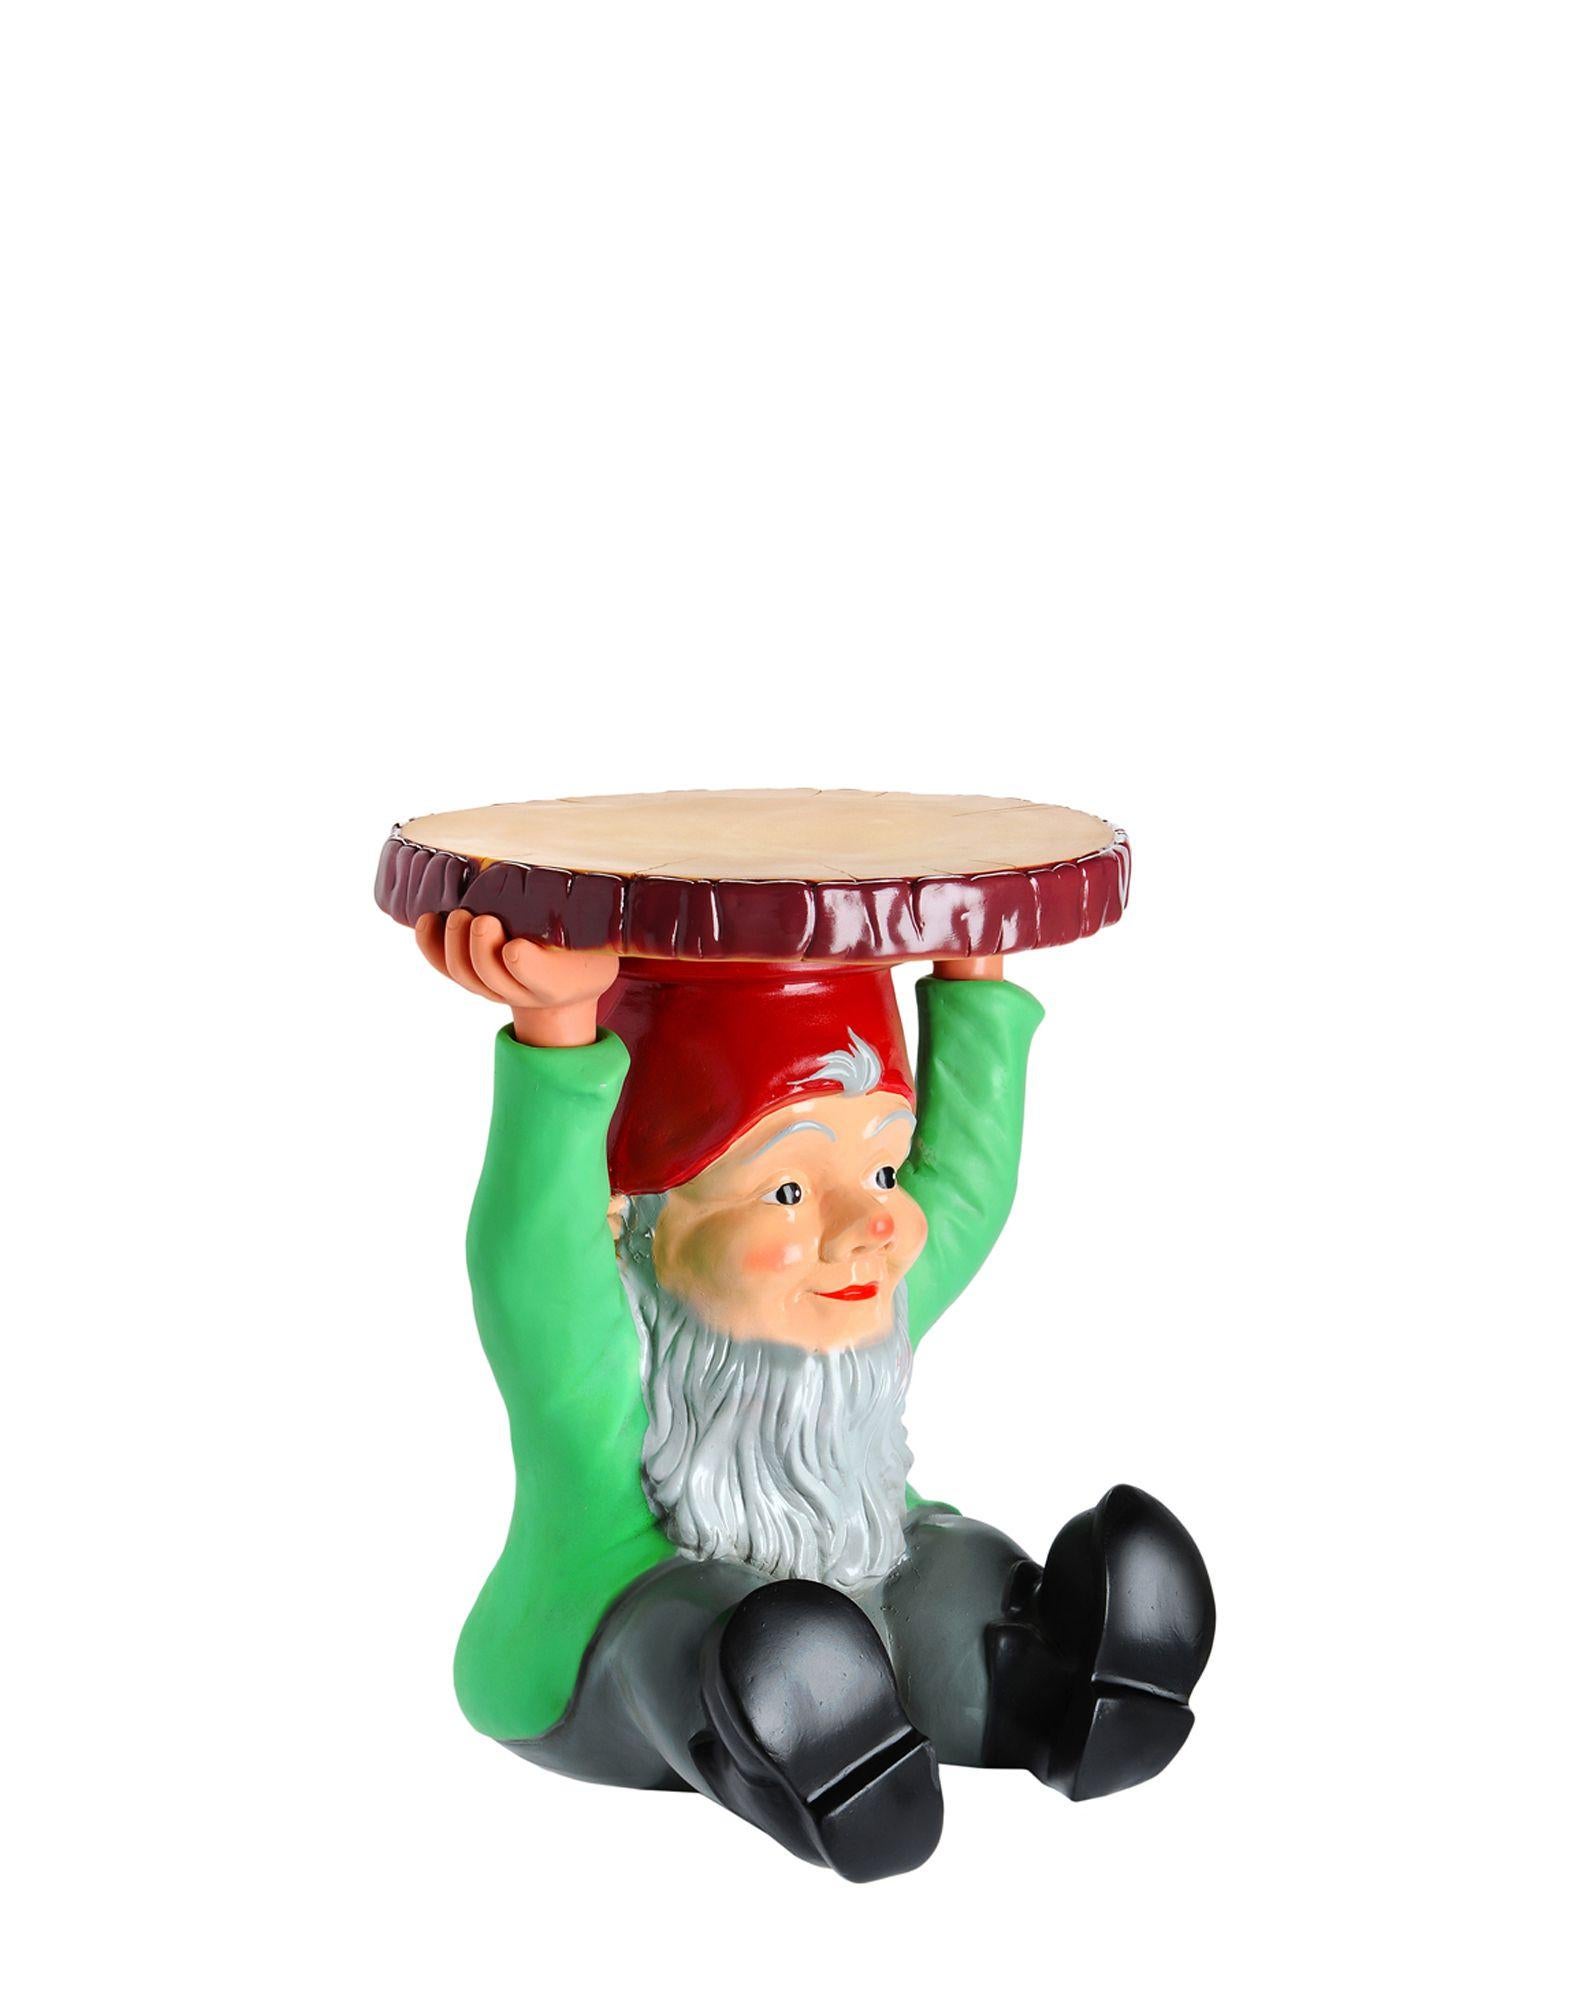 Attila table-stool, is a charismatic personality of striking originality and anti-conformism. Stools and tables which are cute and humorous but with one eye on functionality, thought up to furnish every setting imaginable. The gnome hats, in fact,